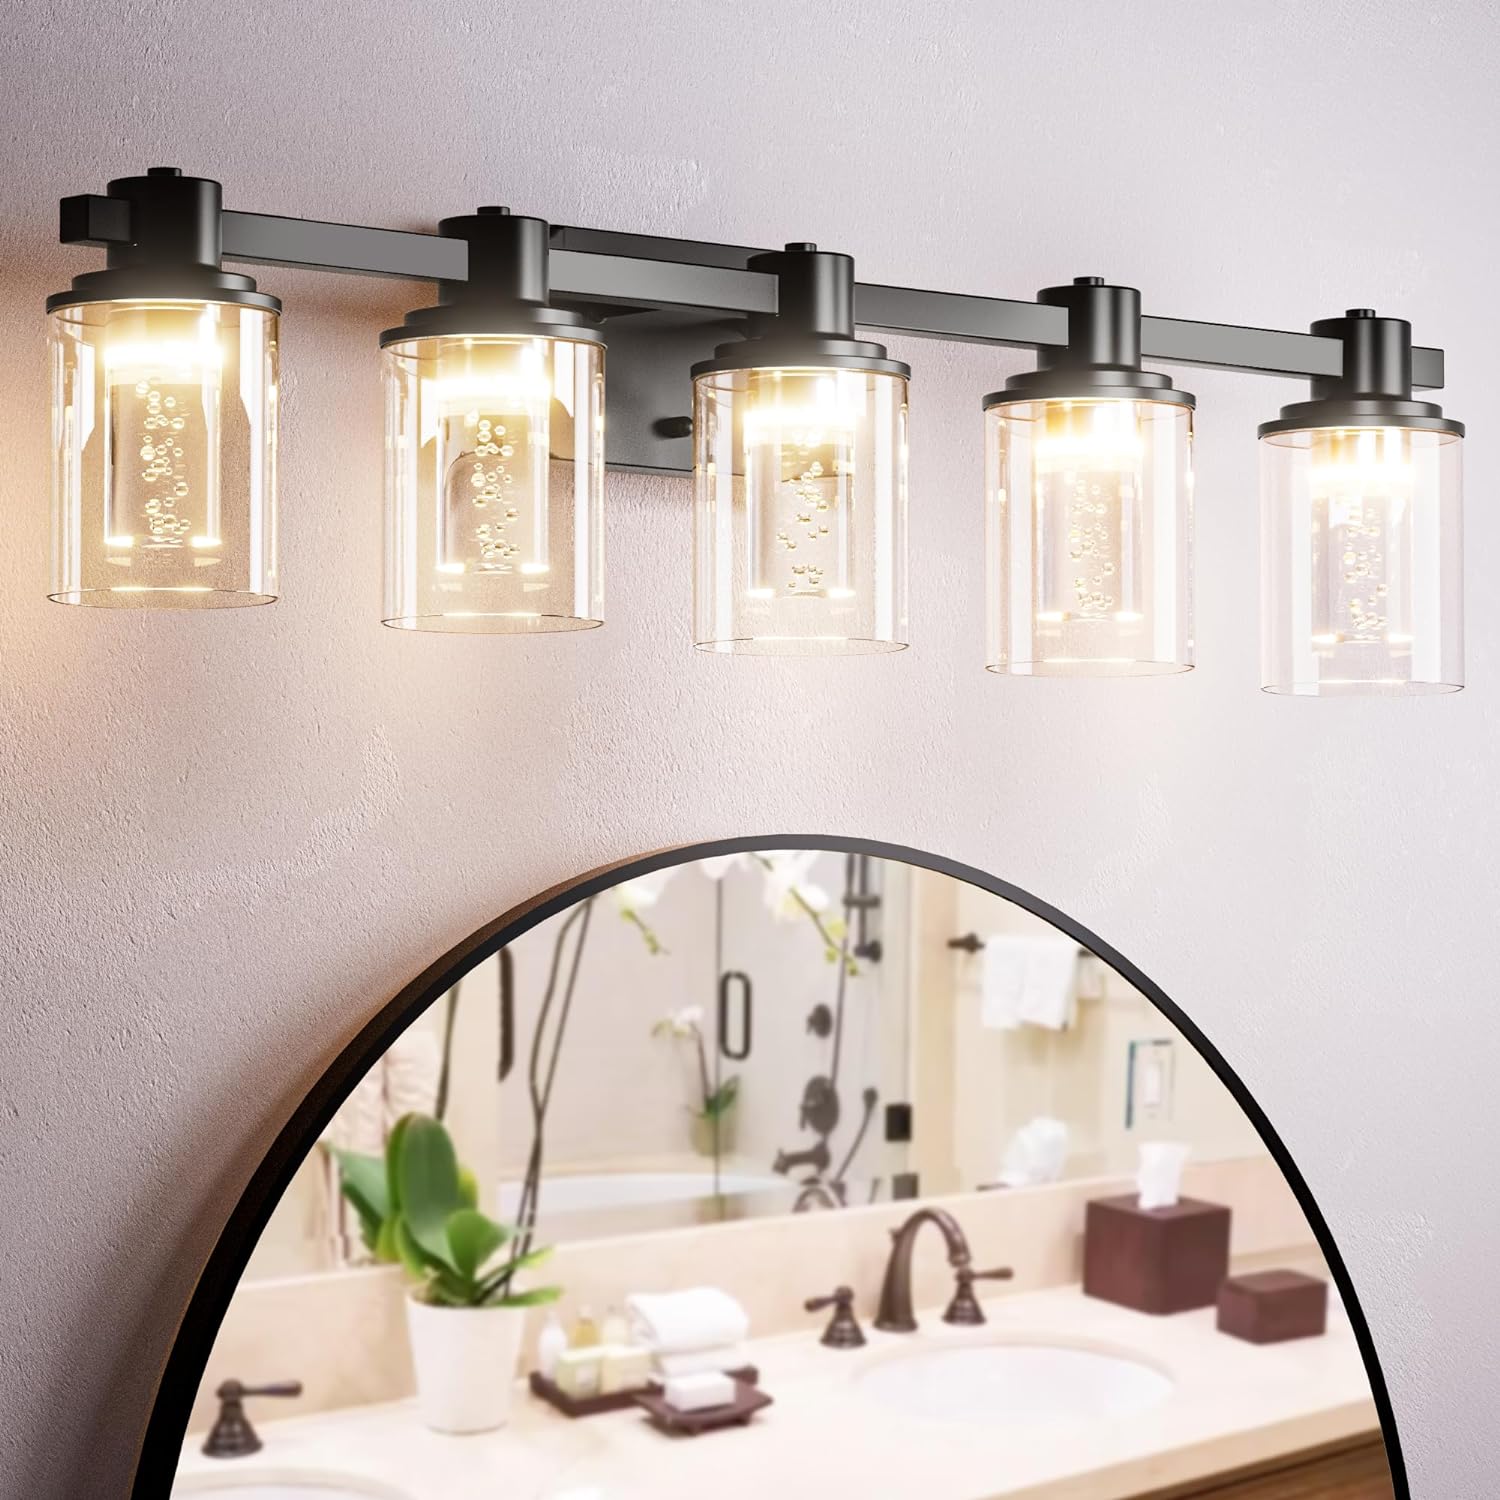 Quntis Bathroom Vanity Lights, 3-Lights Modern Chrome Bathroom Light Fixtures Over Mirror with Clear Glass Shade Crystal Bubble Wall Sconce Lighting for Hallway Kitchen Bedroom Living Room